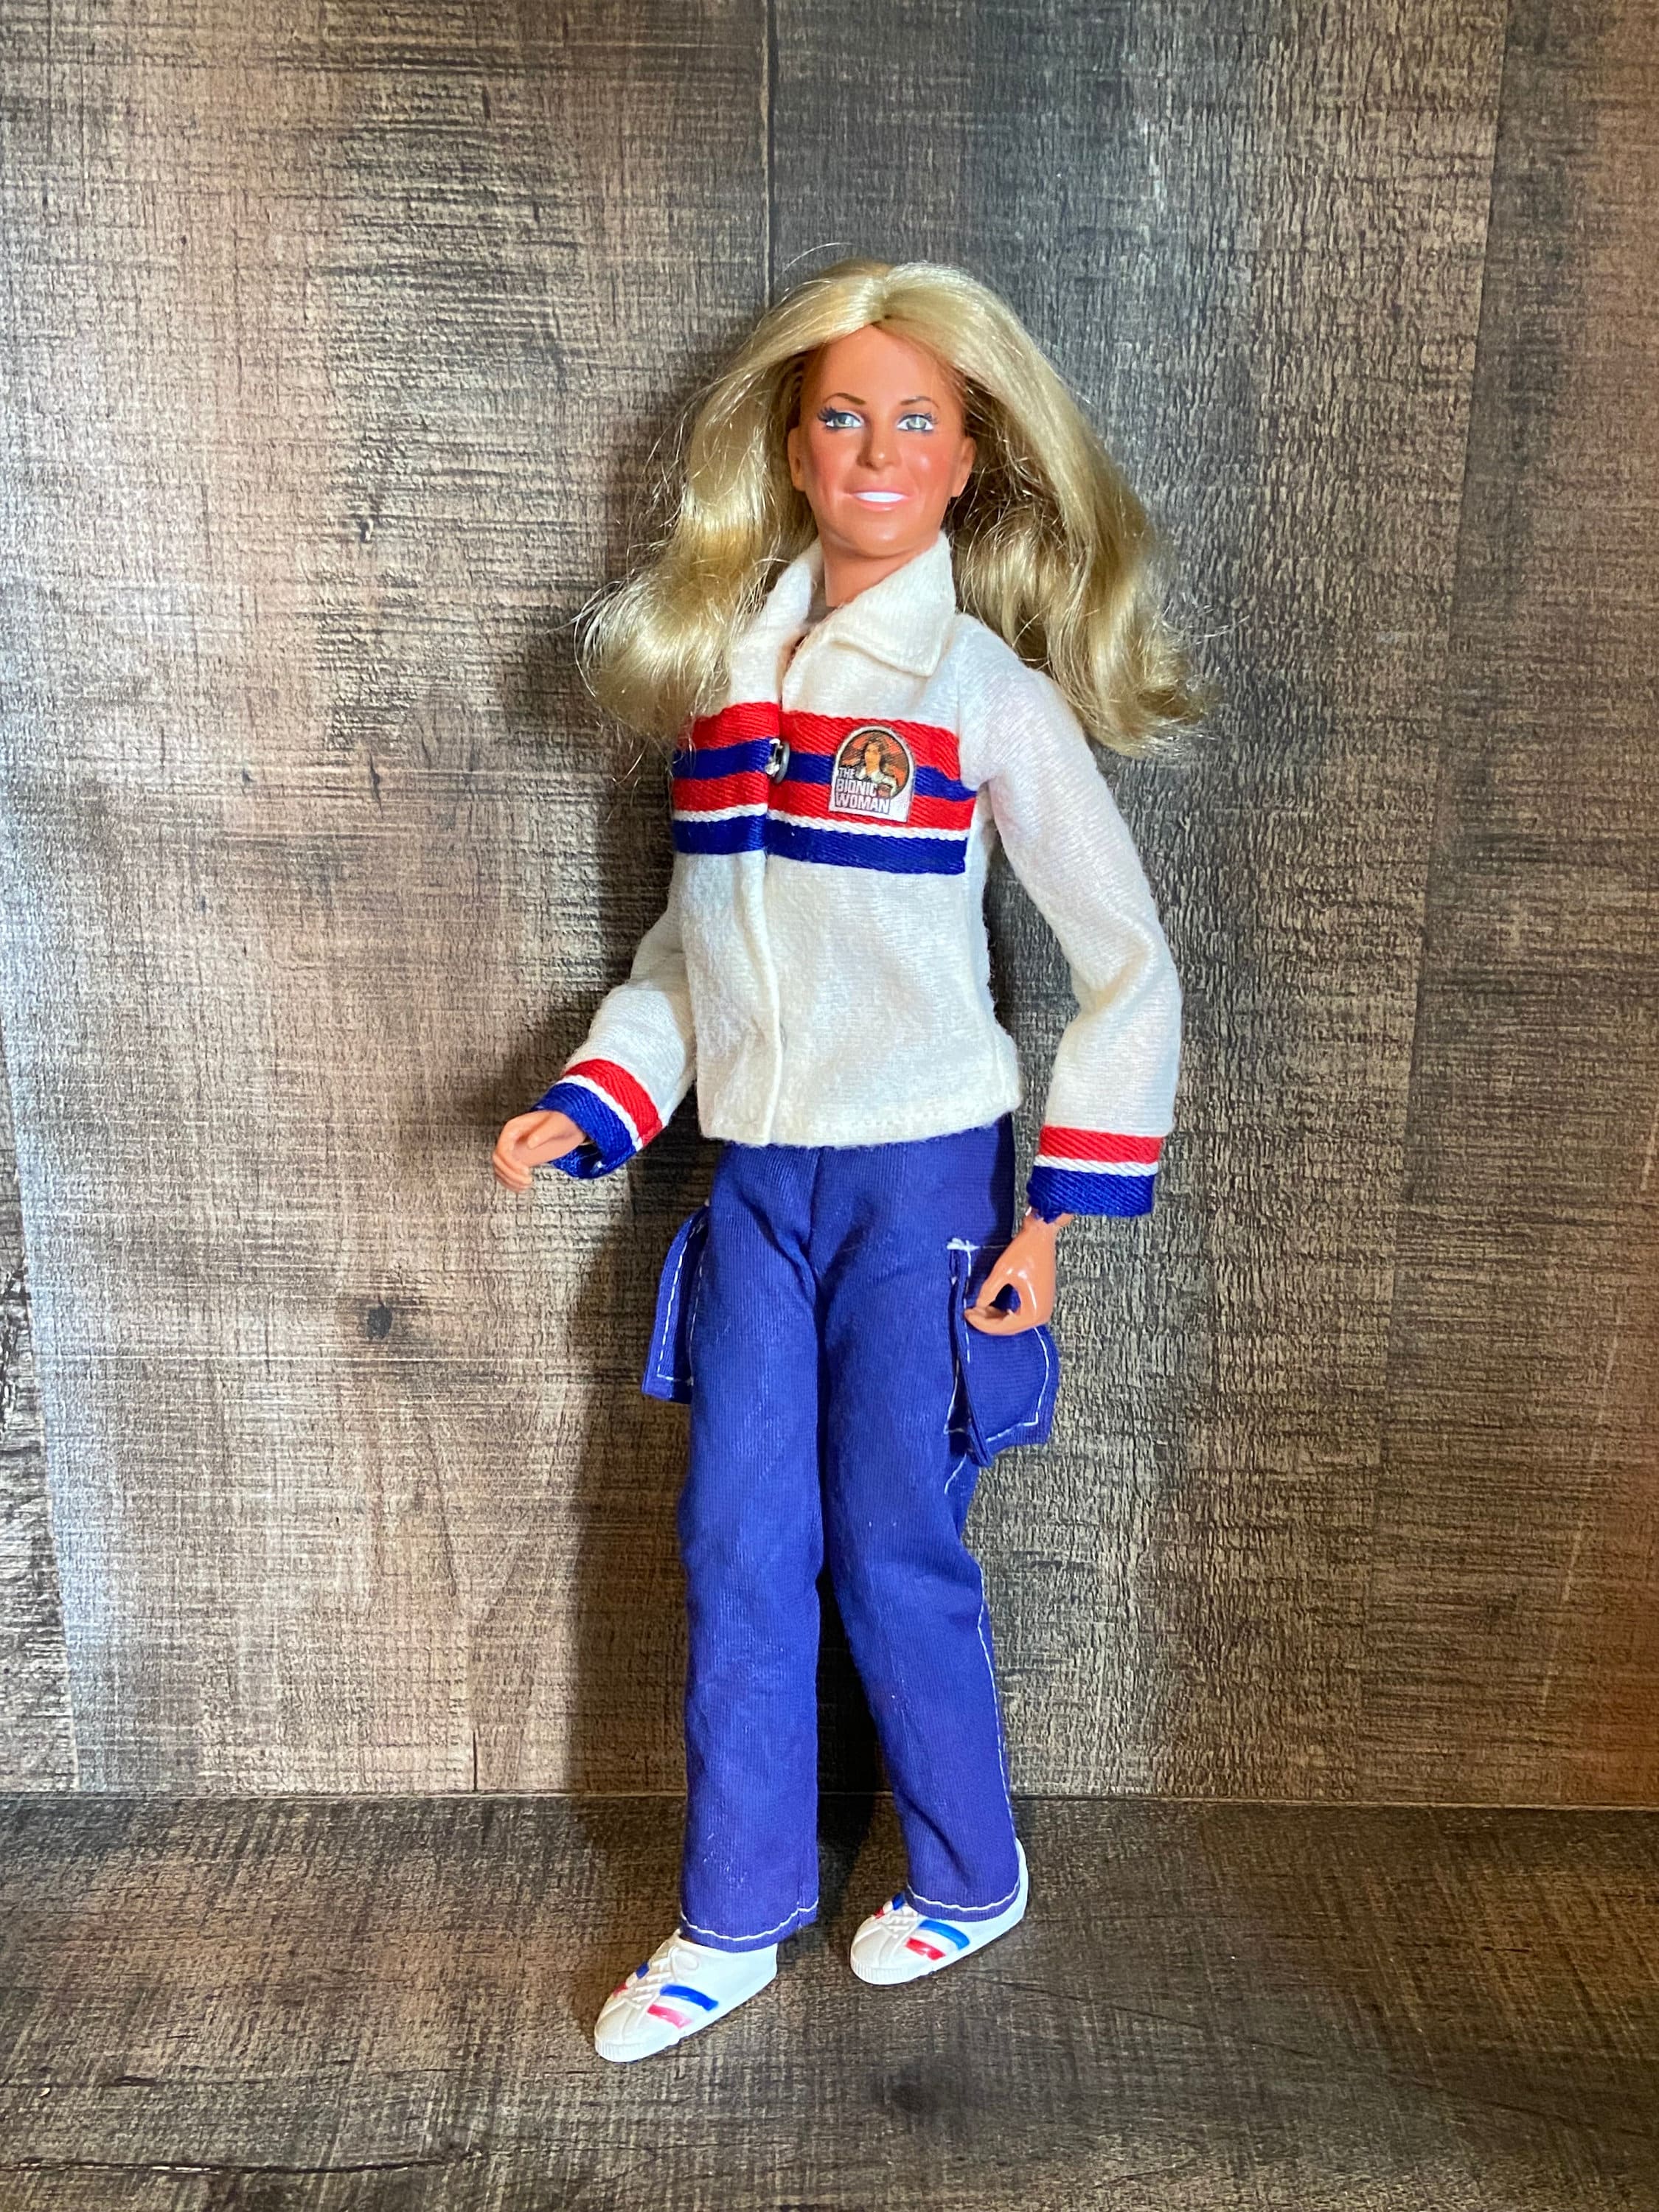 NEW Vintage 1977 The Bionic Woman Doll Jamie Sommers